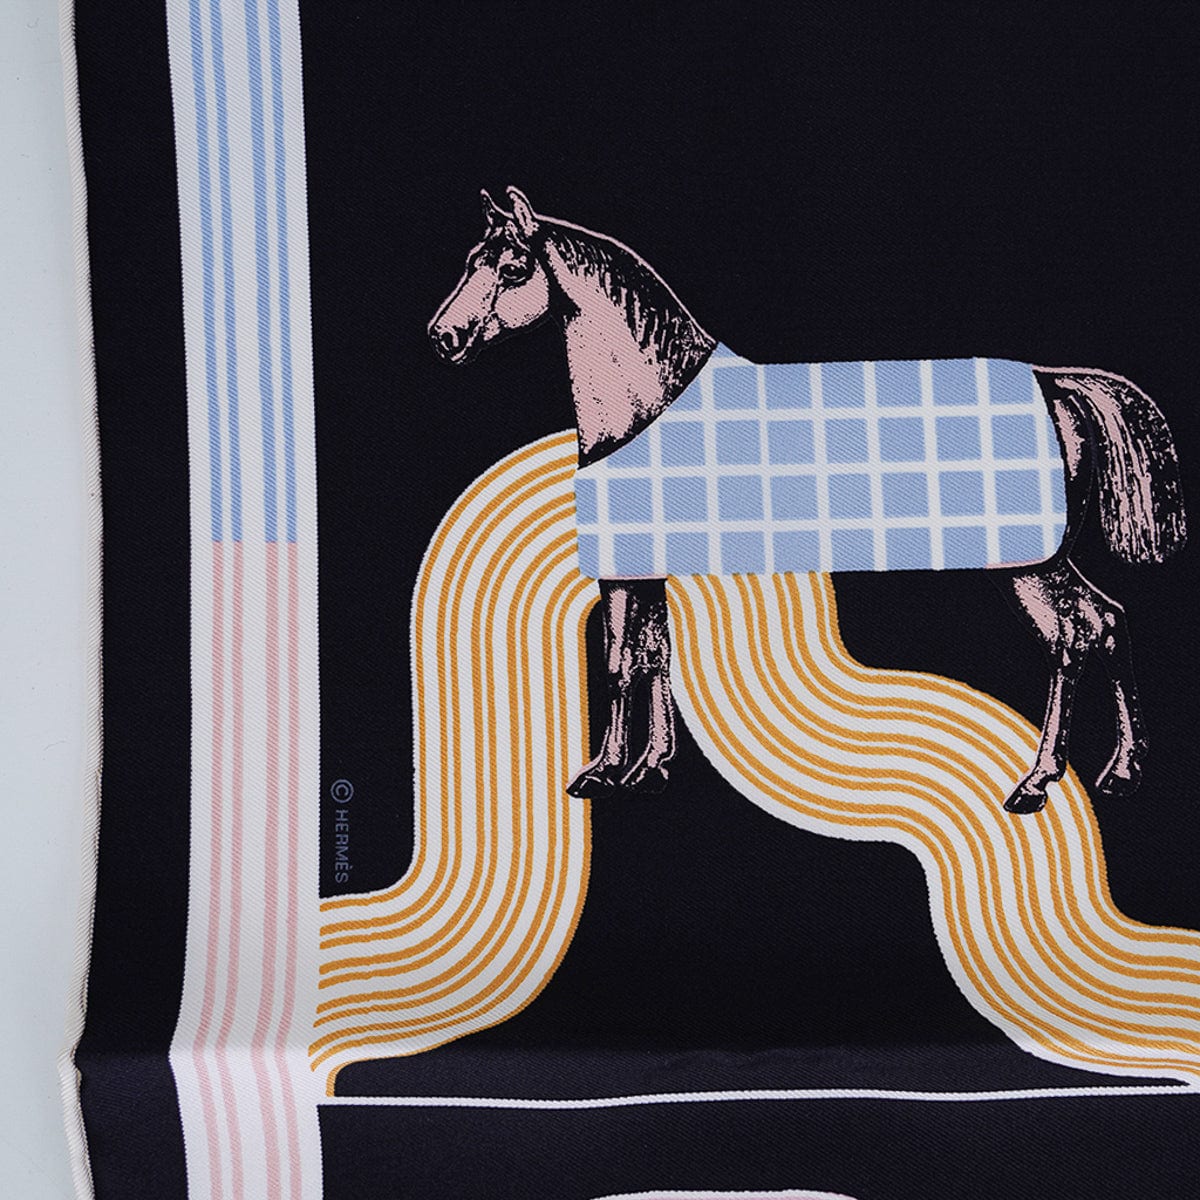 Pony Up with This 'Pegase Pop' Scarf from Hermes